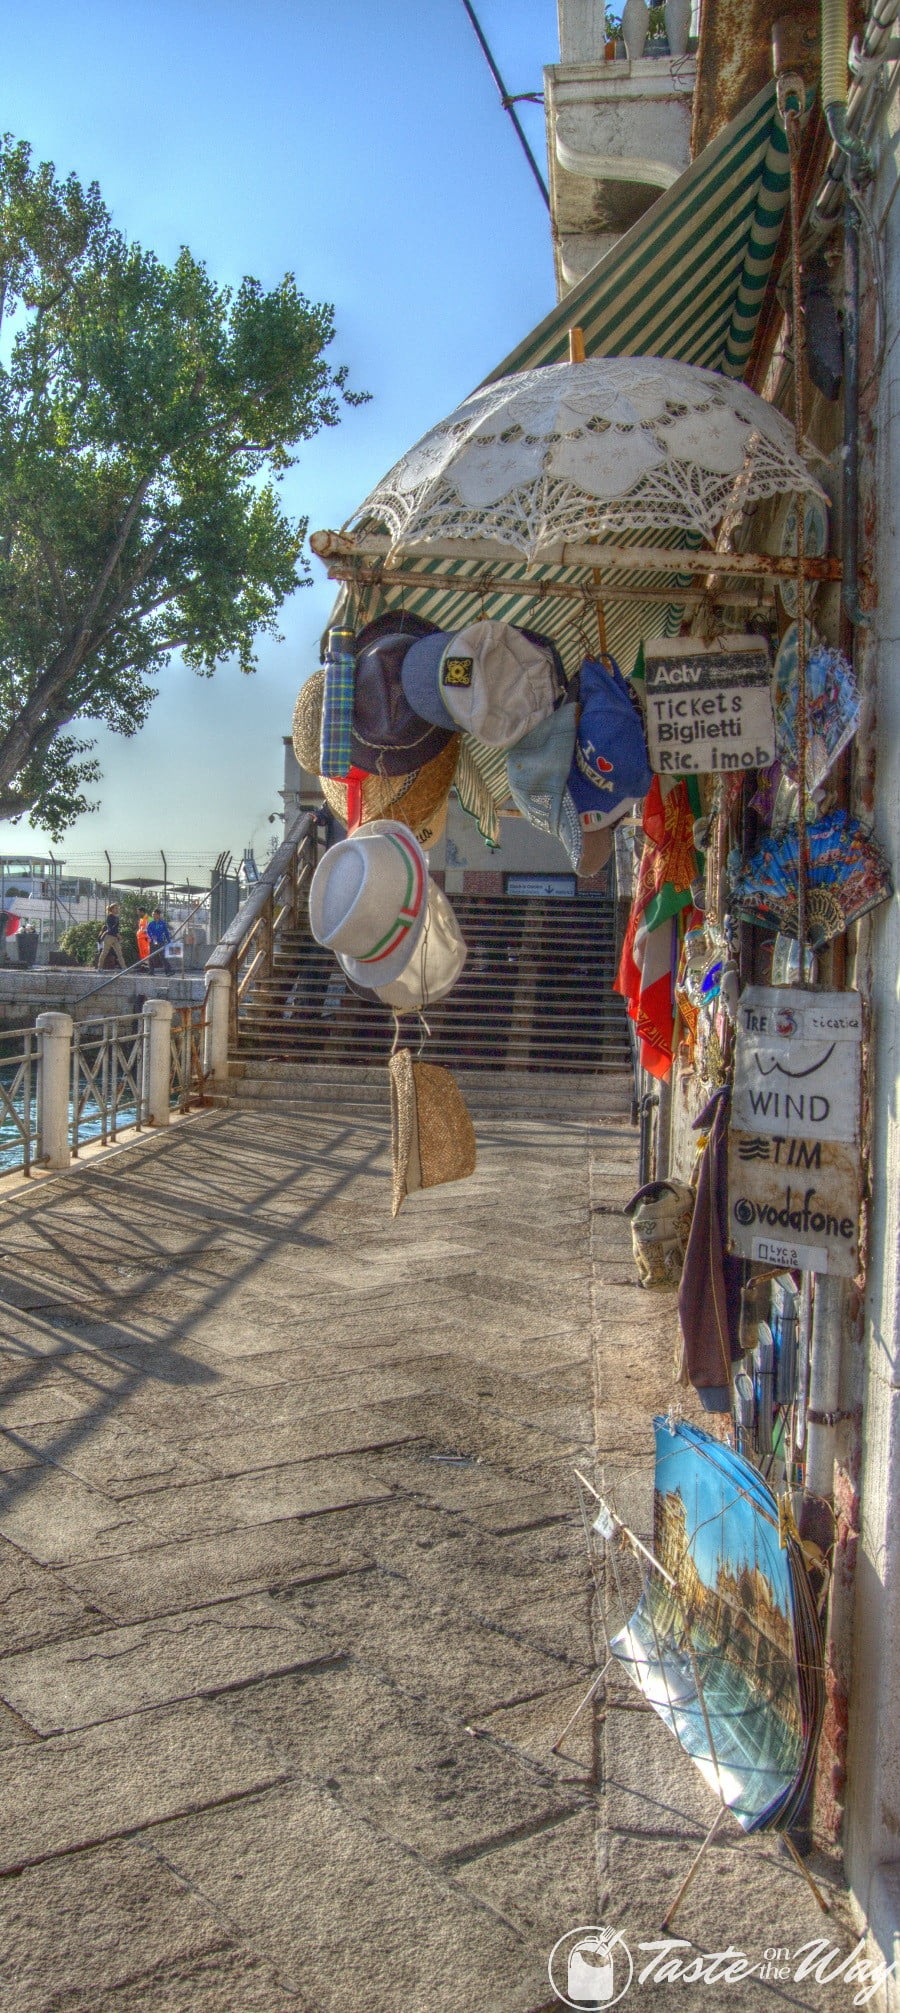 Check out these amazing pictures of souvenir shops in #Venice #travel #photography #hdr